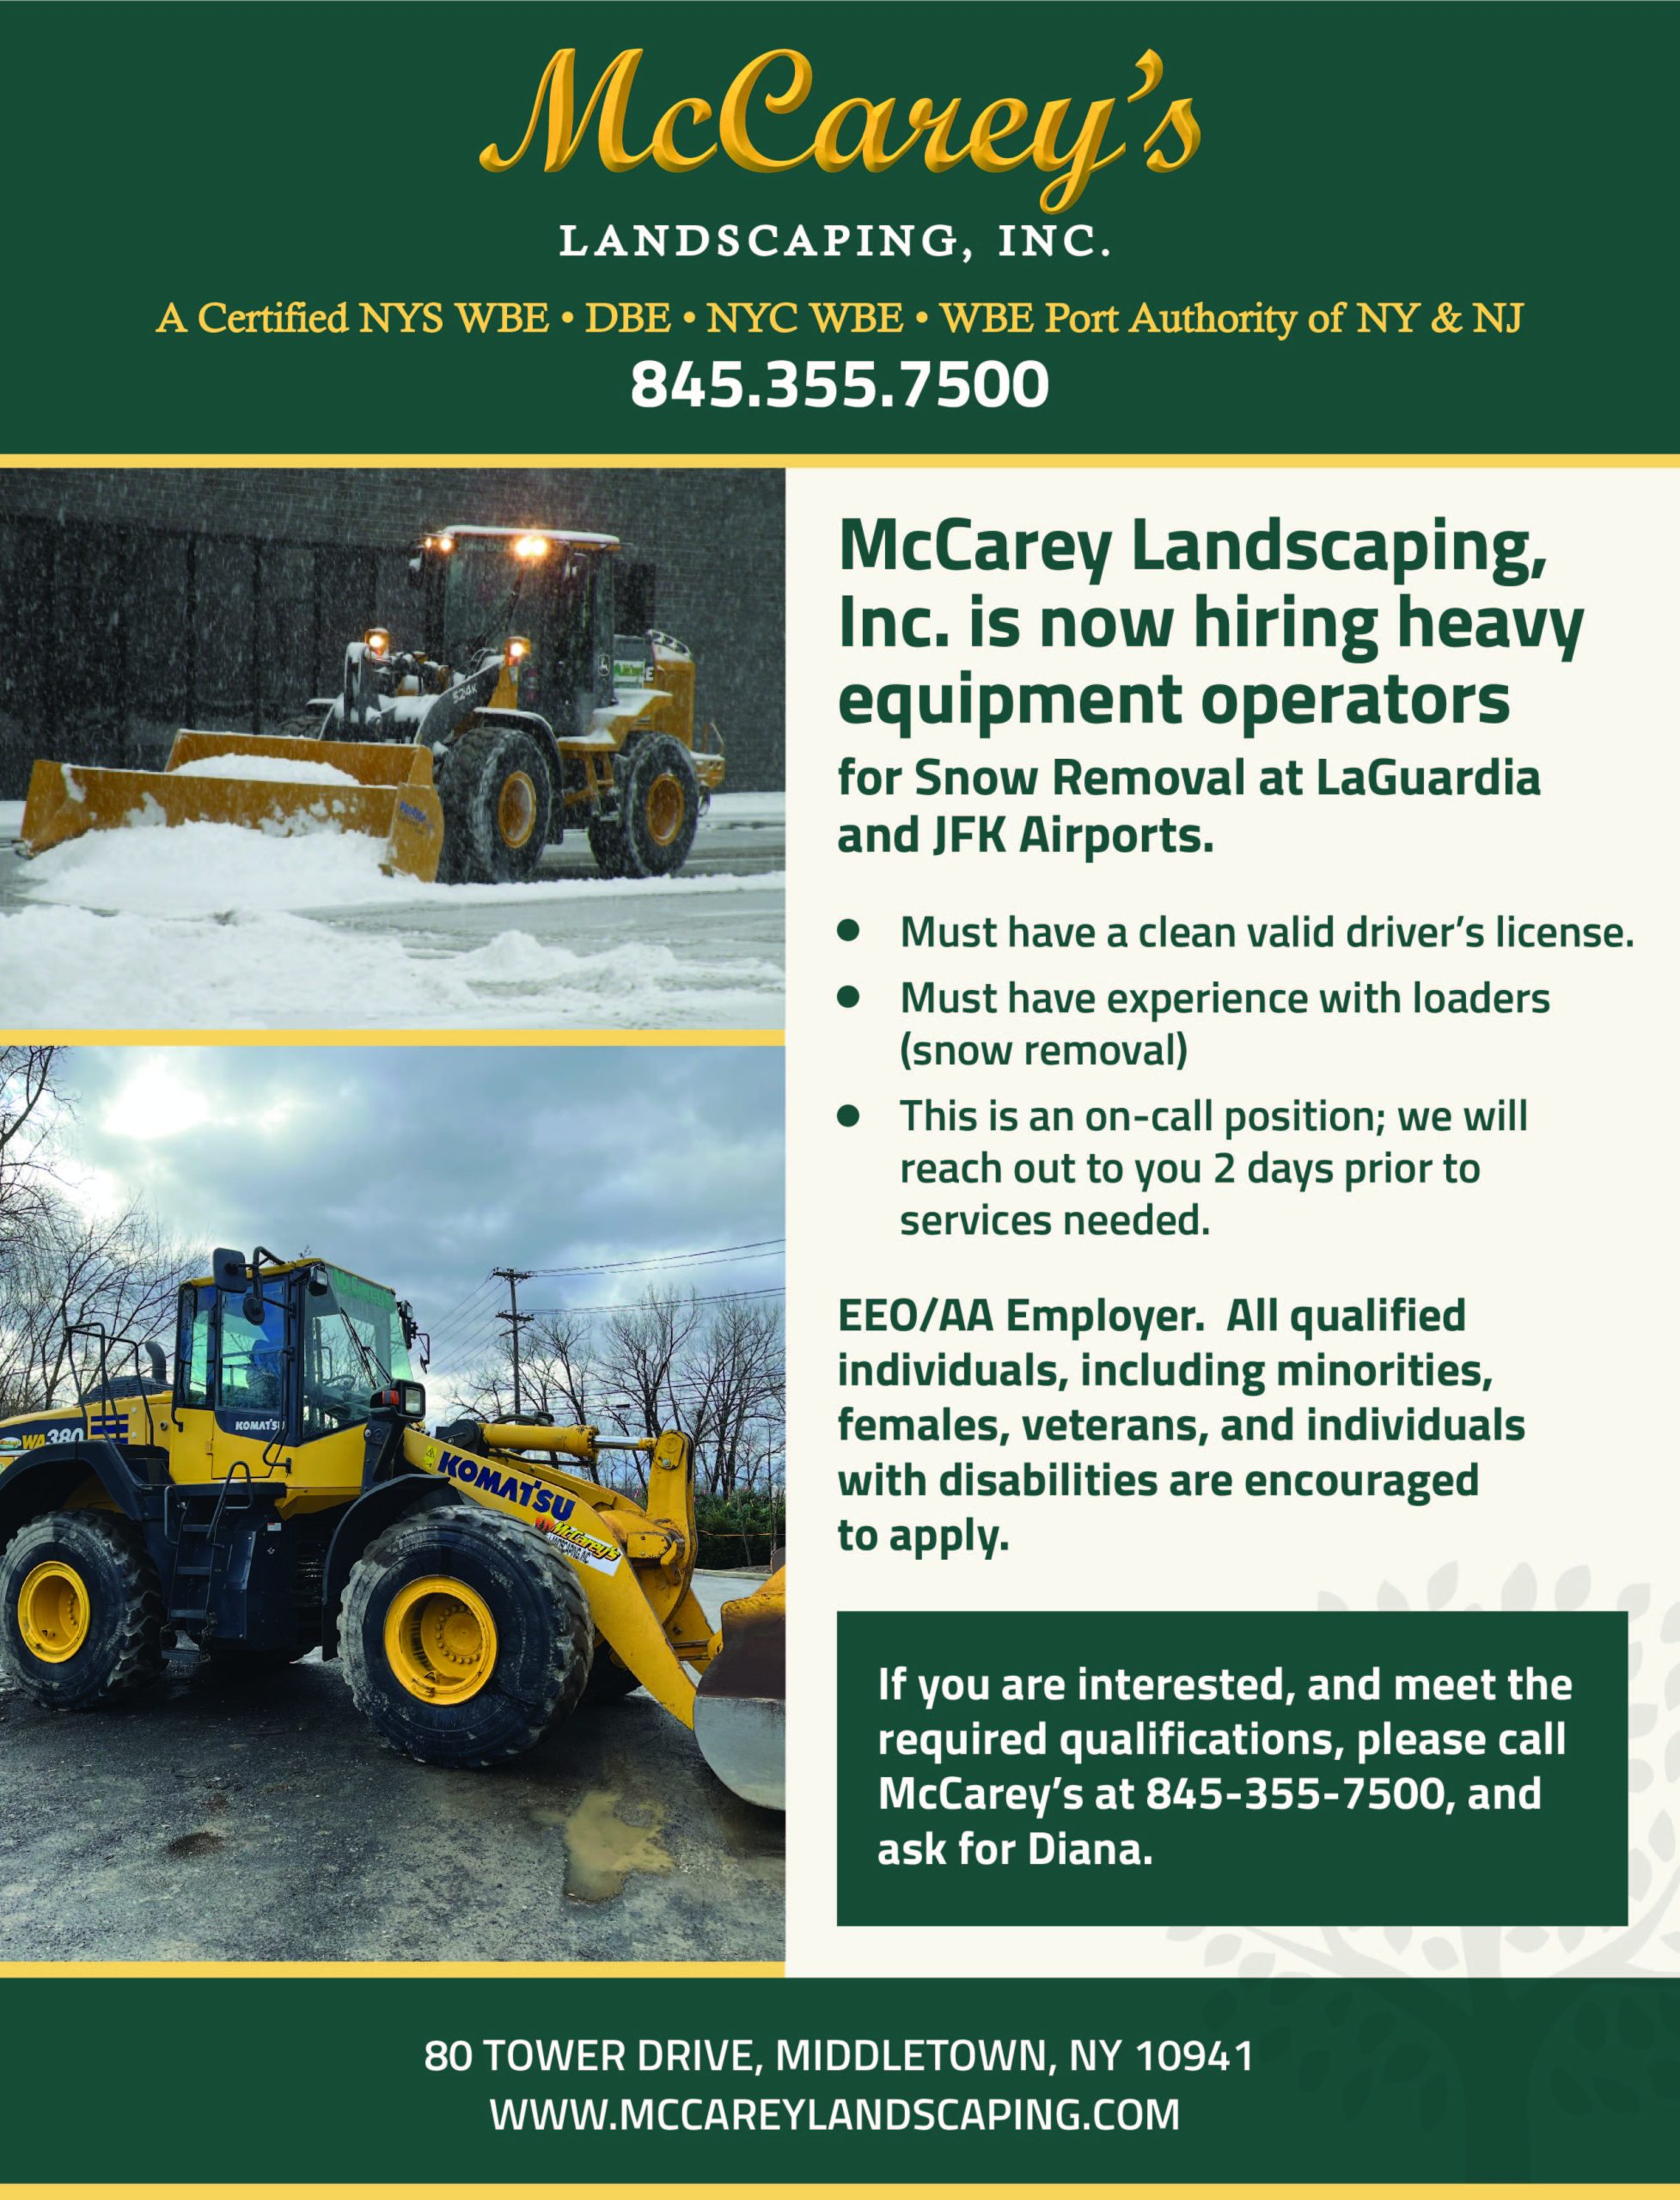 McCarey Landscaping, Inc. is now hiring heavy equipment operators for Snow Removal at LaGuardia and JFK Airports.